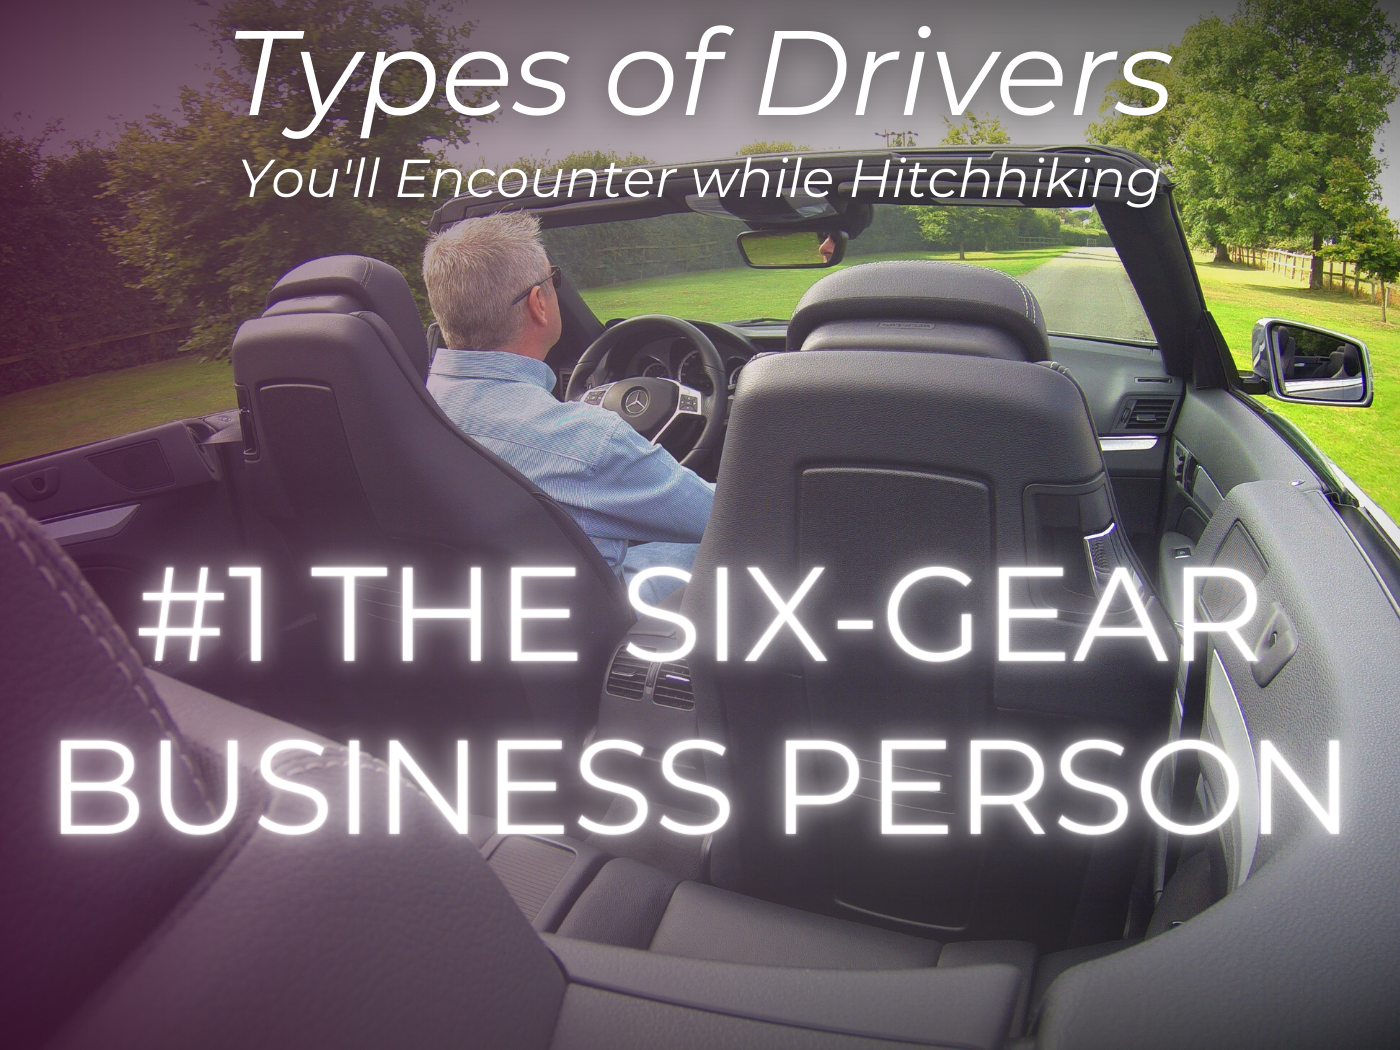 types of drivers you'll hitch with #1 six-gear business person